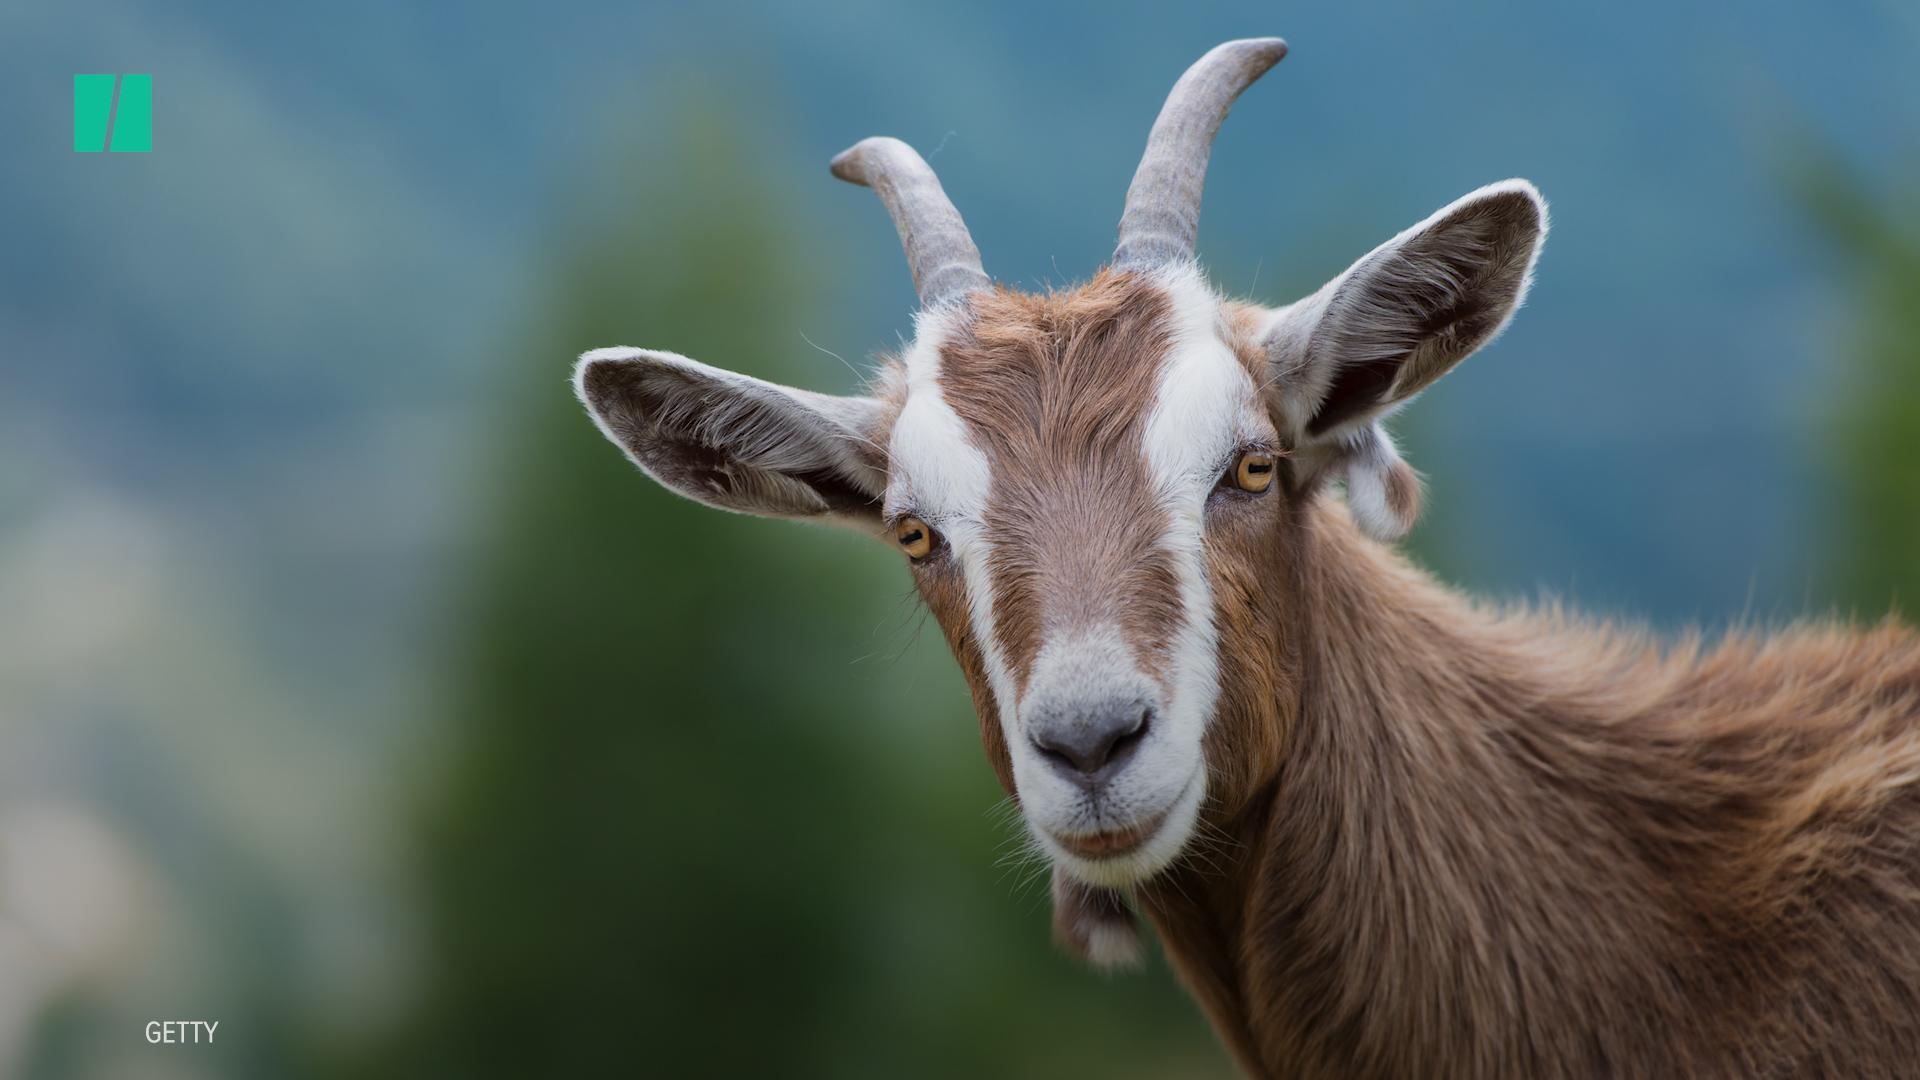 Goat Meat Could Save Our Food System, But We're Too Afraid To Eat